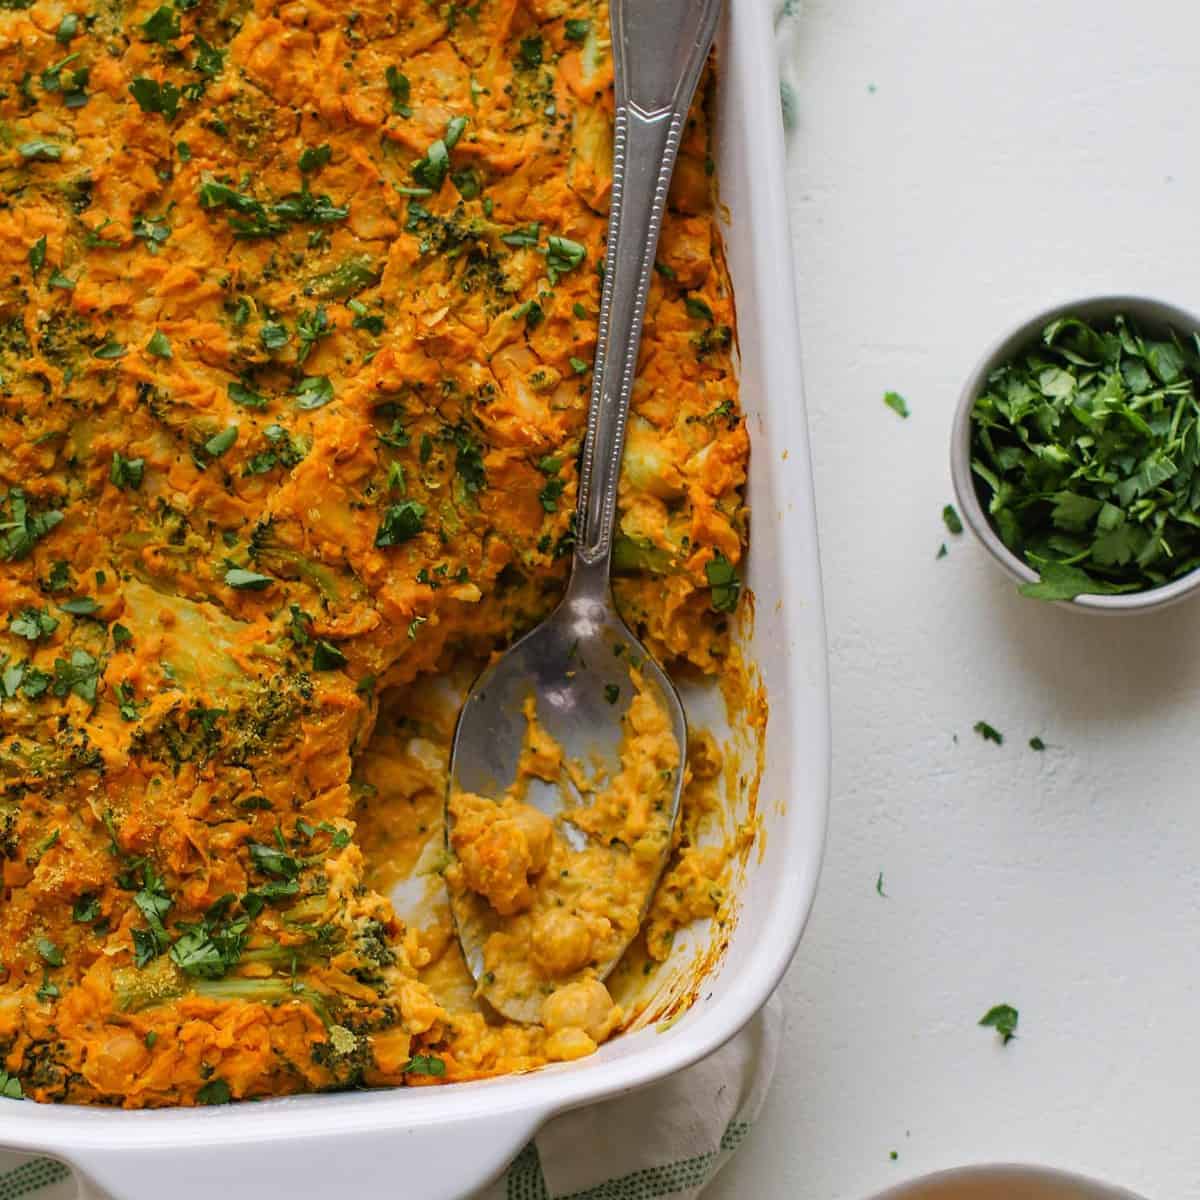  You won't even miss the meat in this hearty and flavorful broccoli and cauliflower casserole.